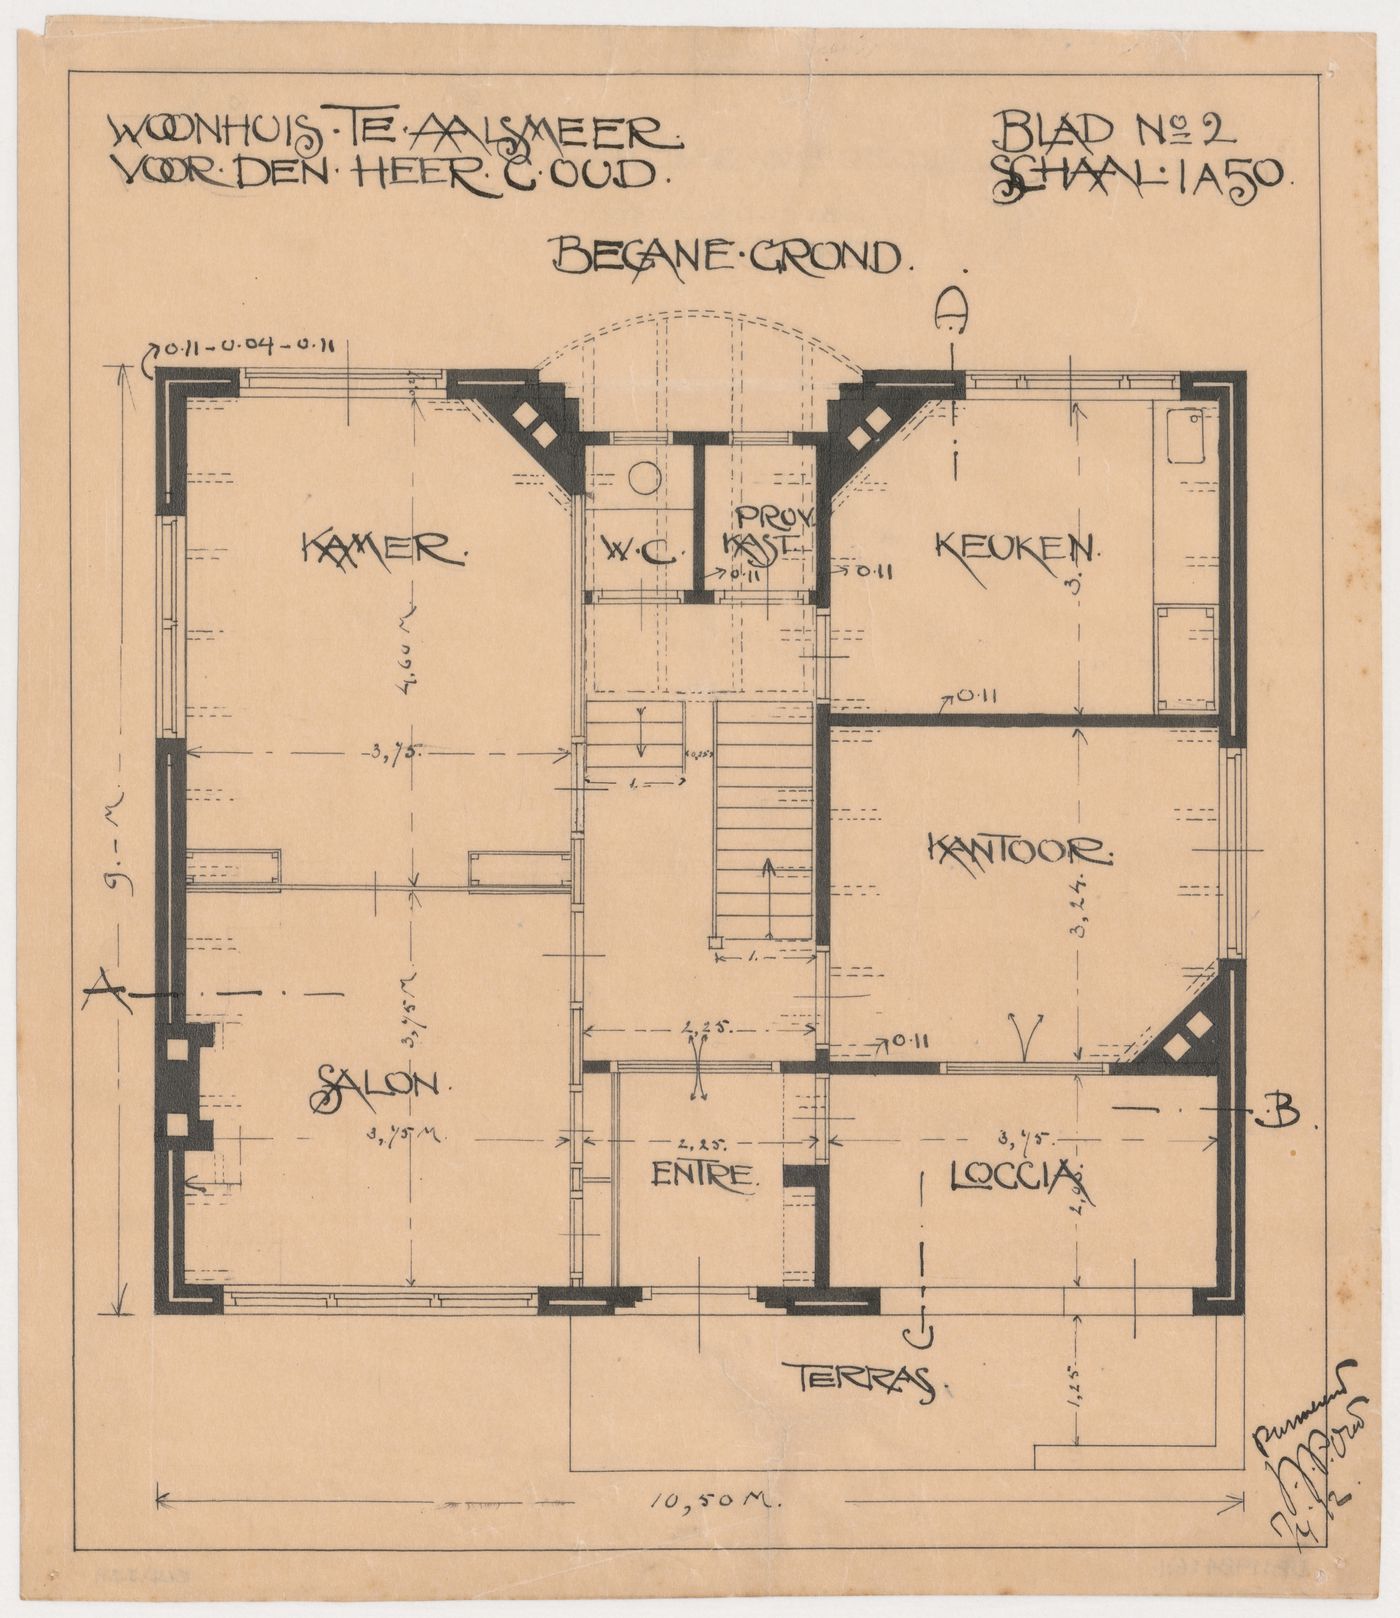 Ground floor plan for a house for G. Oud, Aalsmeer, Netherlands